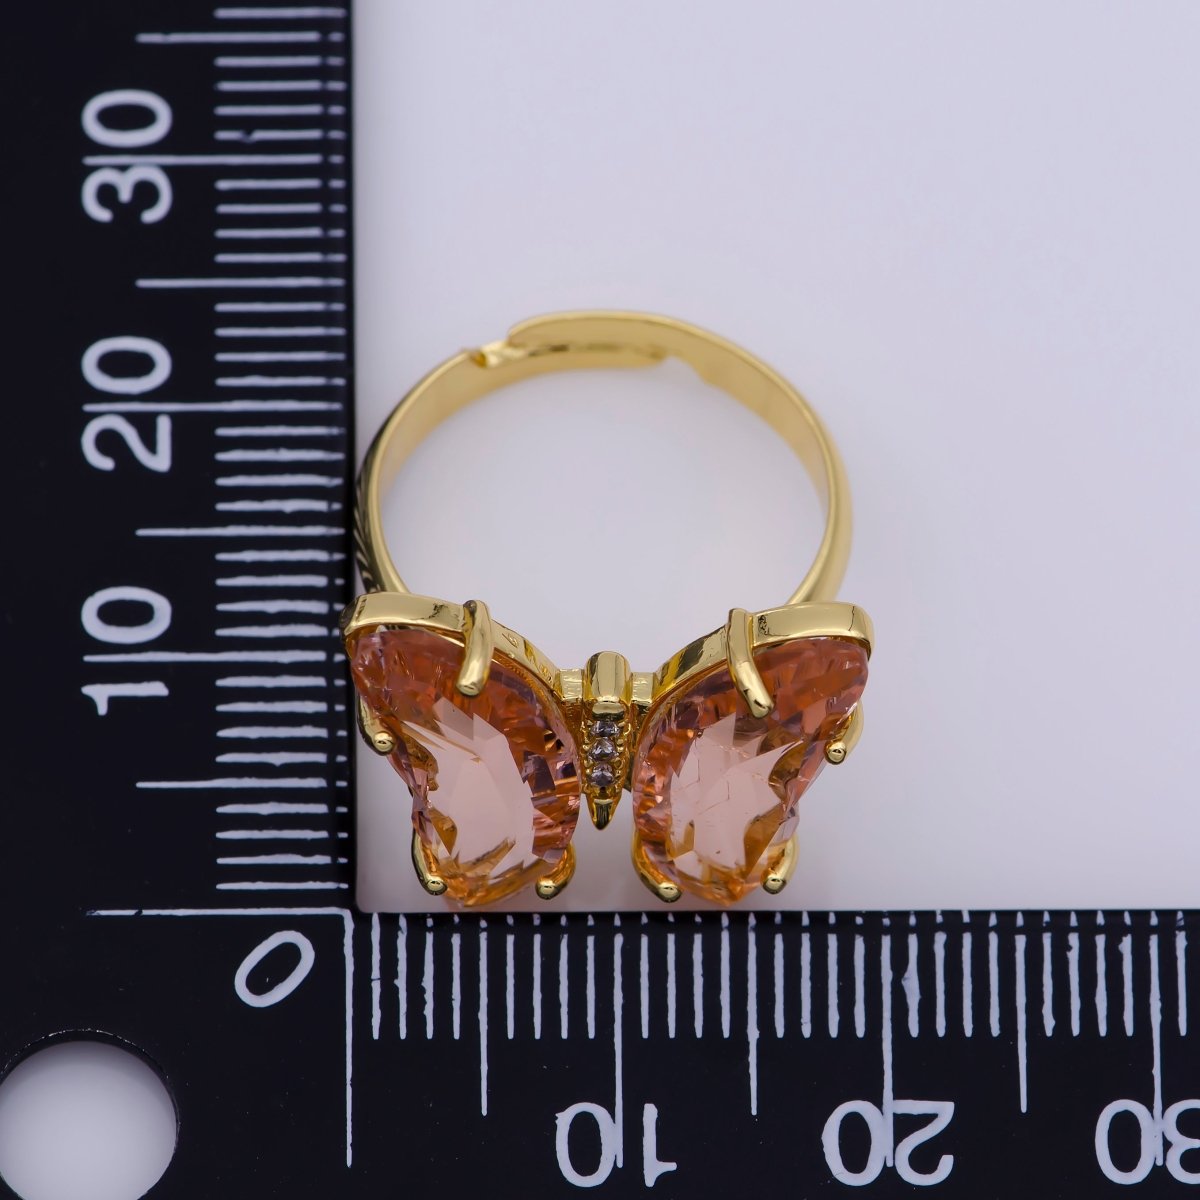 Dainty Butterfly Ring, Adjustable Gold Ring, Pink Cz Mariposa Ring, Animal Lover for Statement jewelry Stackable Everday Wear - DLUXCA